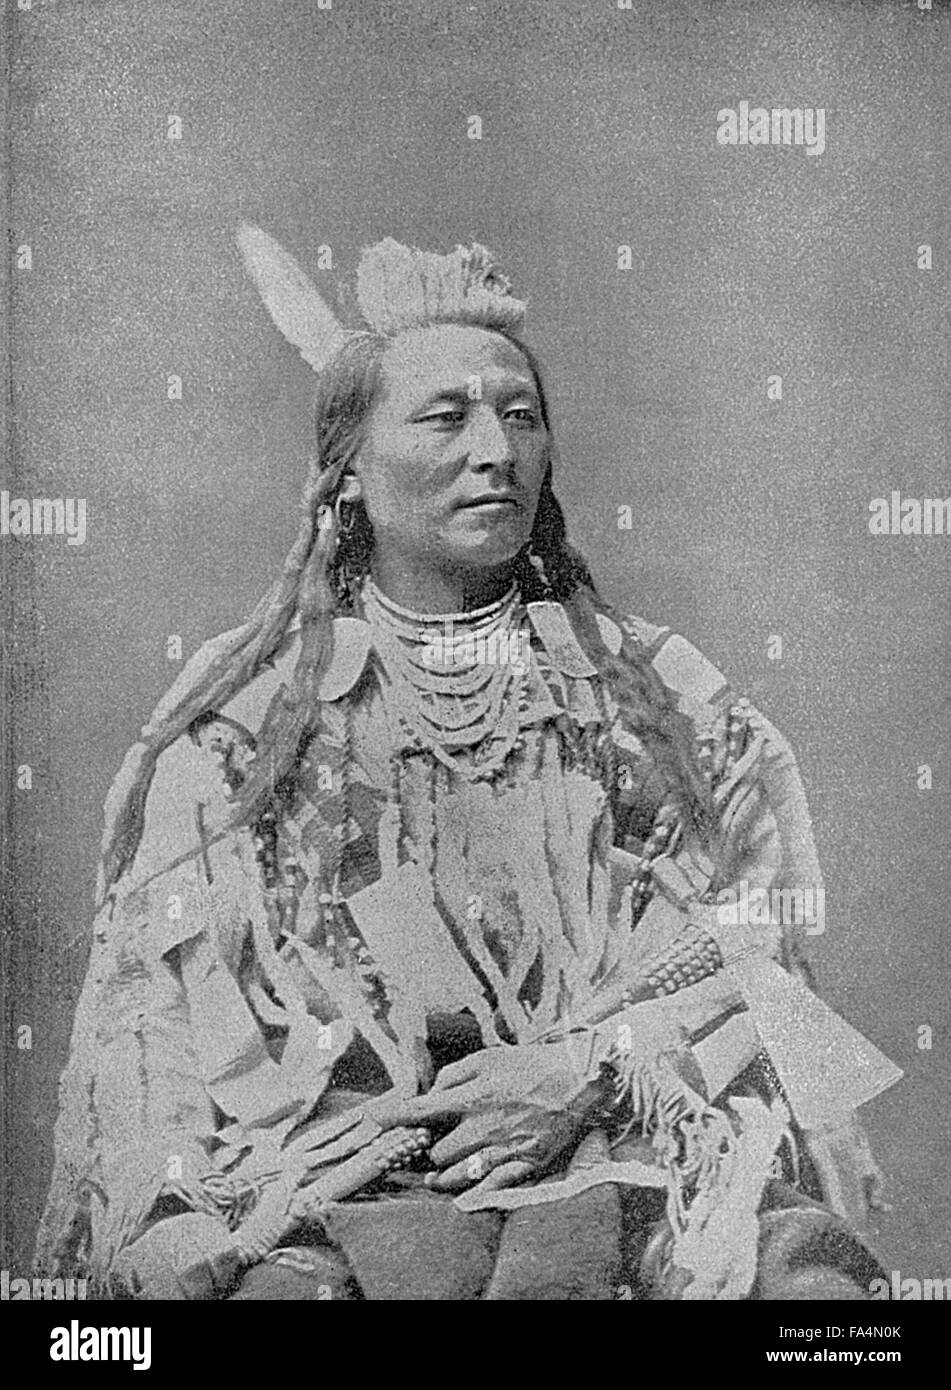 Plenty Scalps (1851-1916), Oglala Sioux Chief after Sitting Bull, Book Photograph from “Indian Horrors or Massacres of the Red Men”, by Henry Davenport Northrop, 1891 Stock Photo